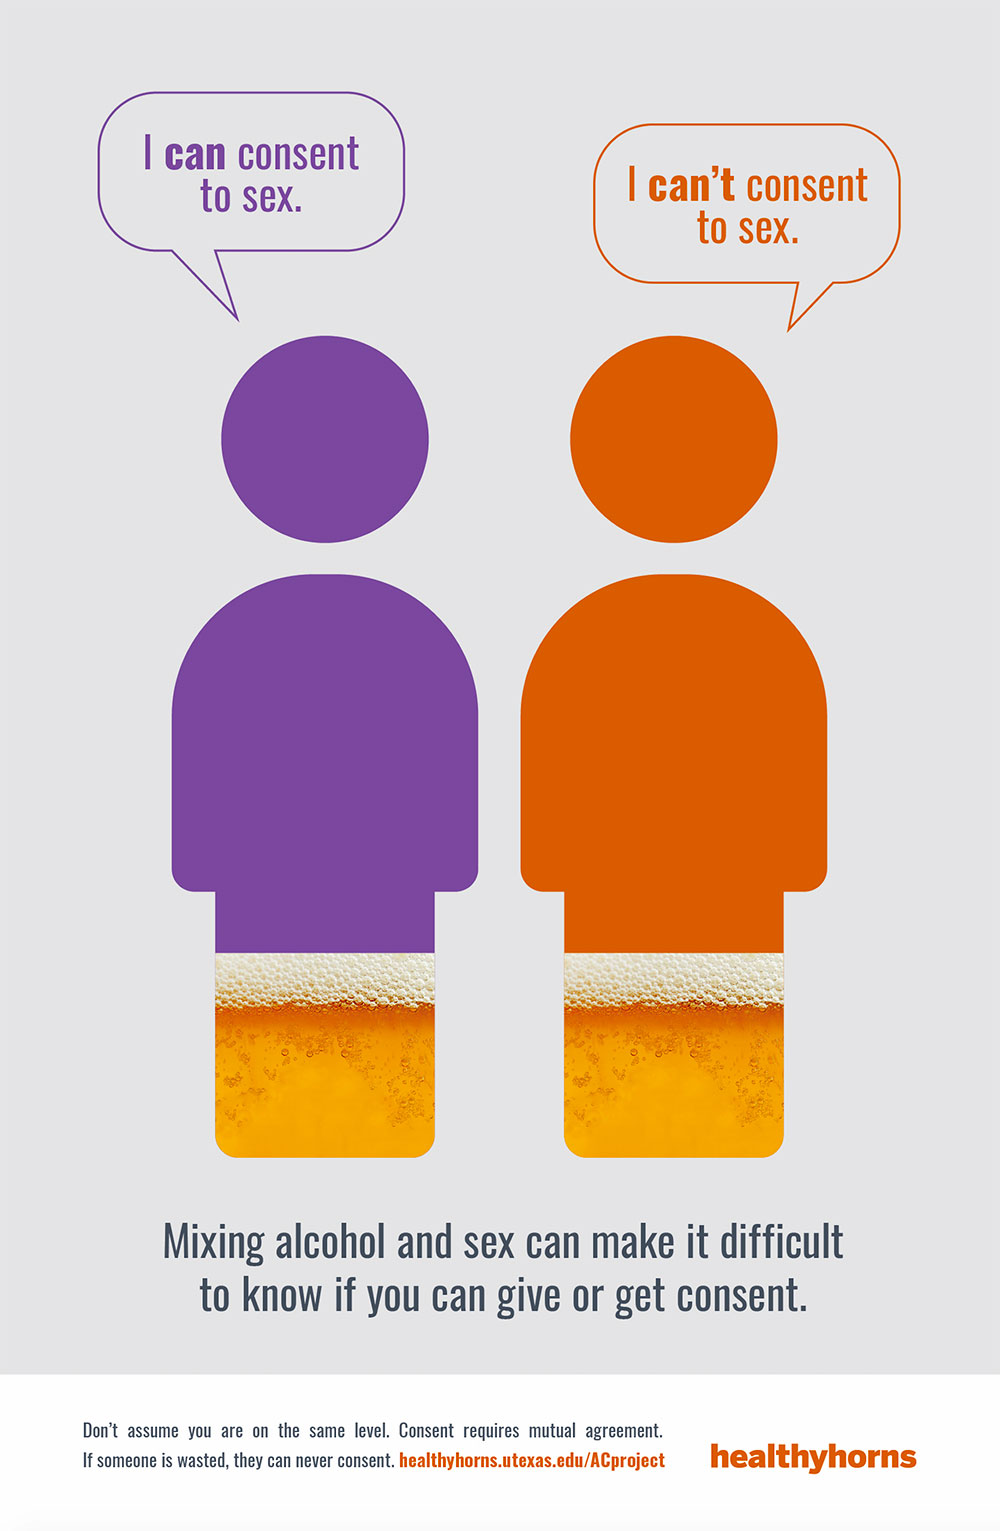 Person one says 'I can consent to sex.' Person two says 'I can't consent to sex.' Mixing alcohol and sex can make it difficult to know if yuo can give or get consent. Don't assume you are on the same level. Consent requires mutual agreement. If someone is wasted they can never consent.